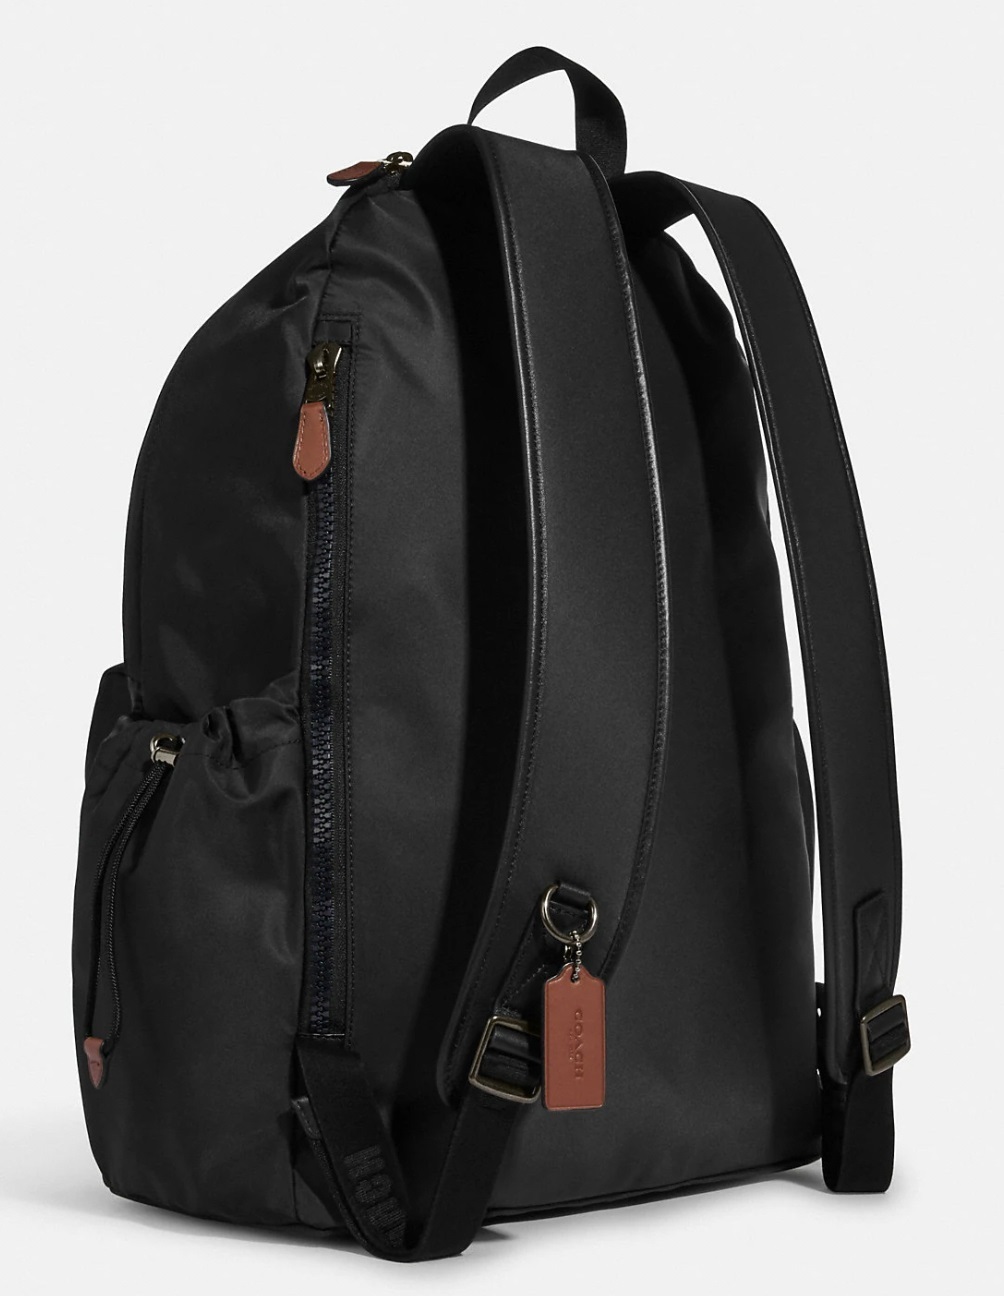 BALO ĐEN DU LỊCH COACH MAX BACKPACK NYLON TWILL AND NATURAL SMOOTH CALF LEATHER GUNMETAL BLACK C9834 2